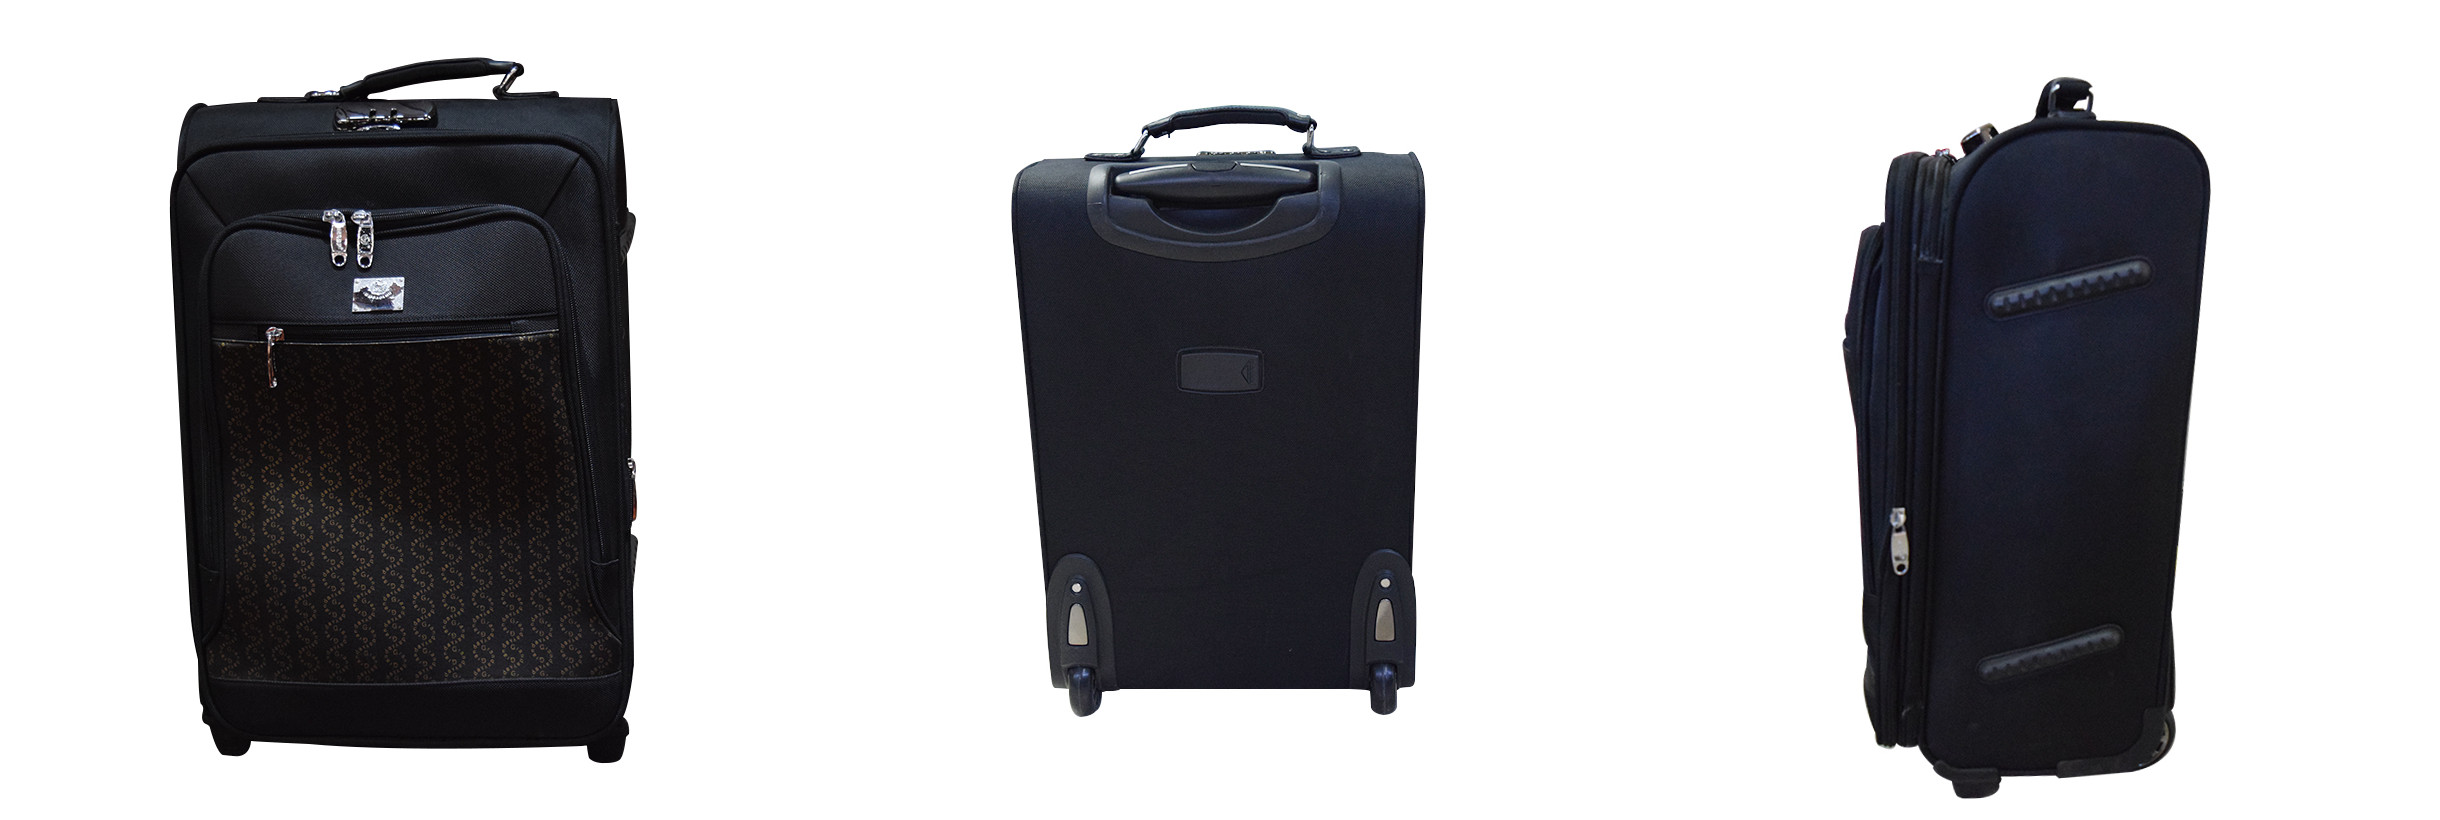 black cloth luggage for busniess tirp